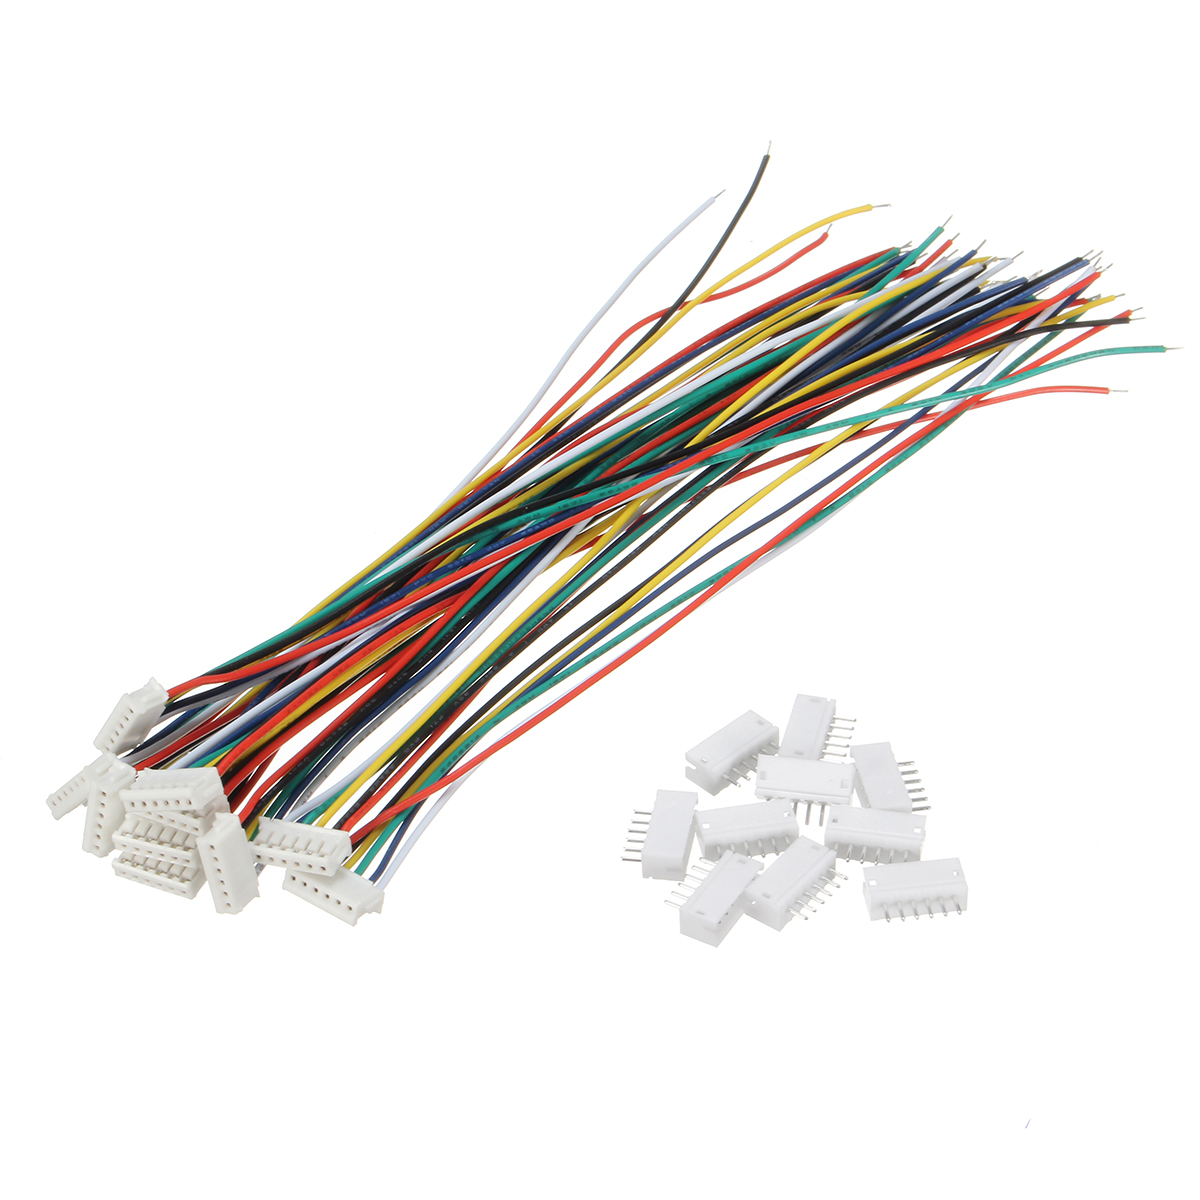 Excellwayreg-Mini-Micro-JST-15mm-ZH-6-Pin-Connector-Plug-and-Wires-Cables-15cm-10-Set-1170230-1